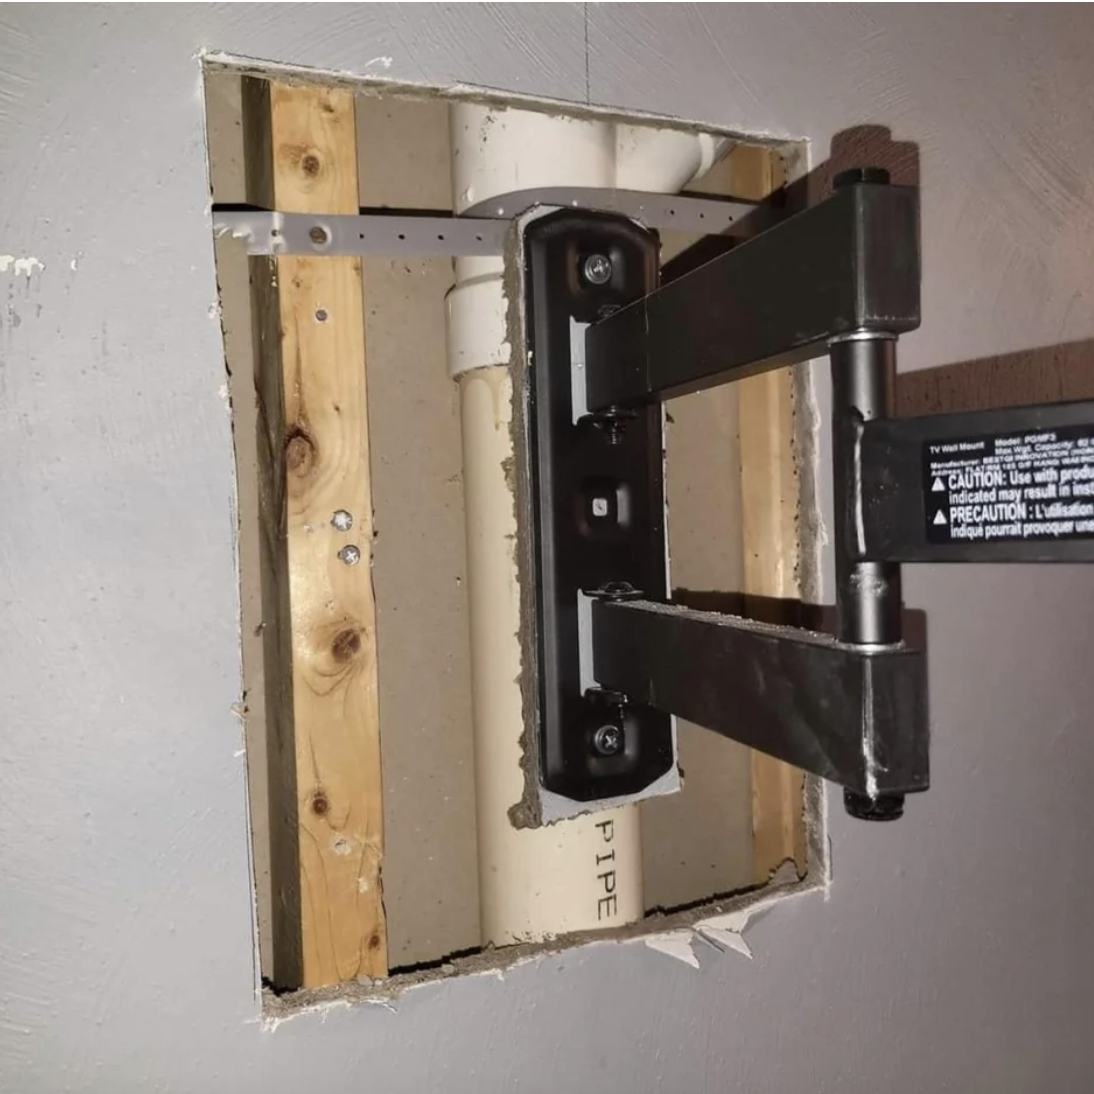 A TV mounting kit attached to a pipe through the wall